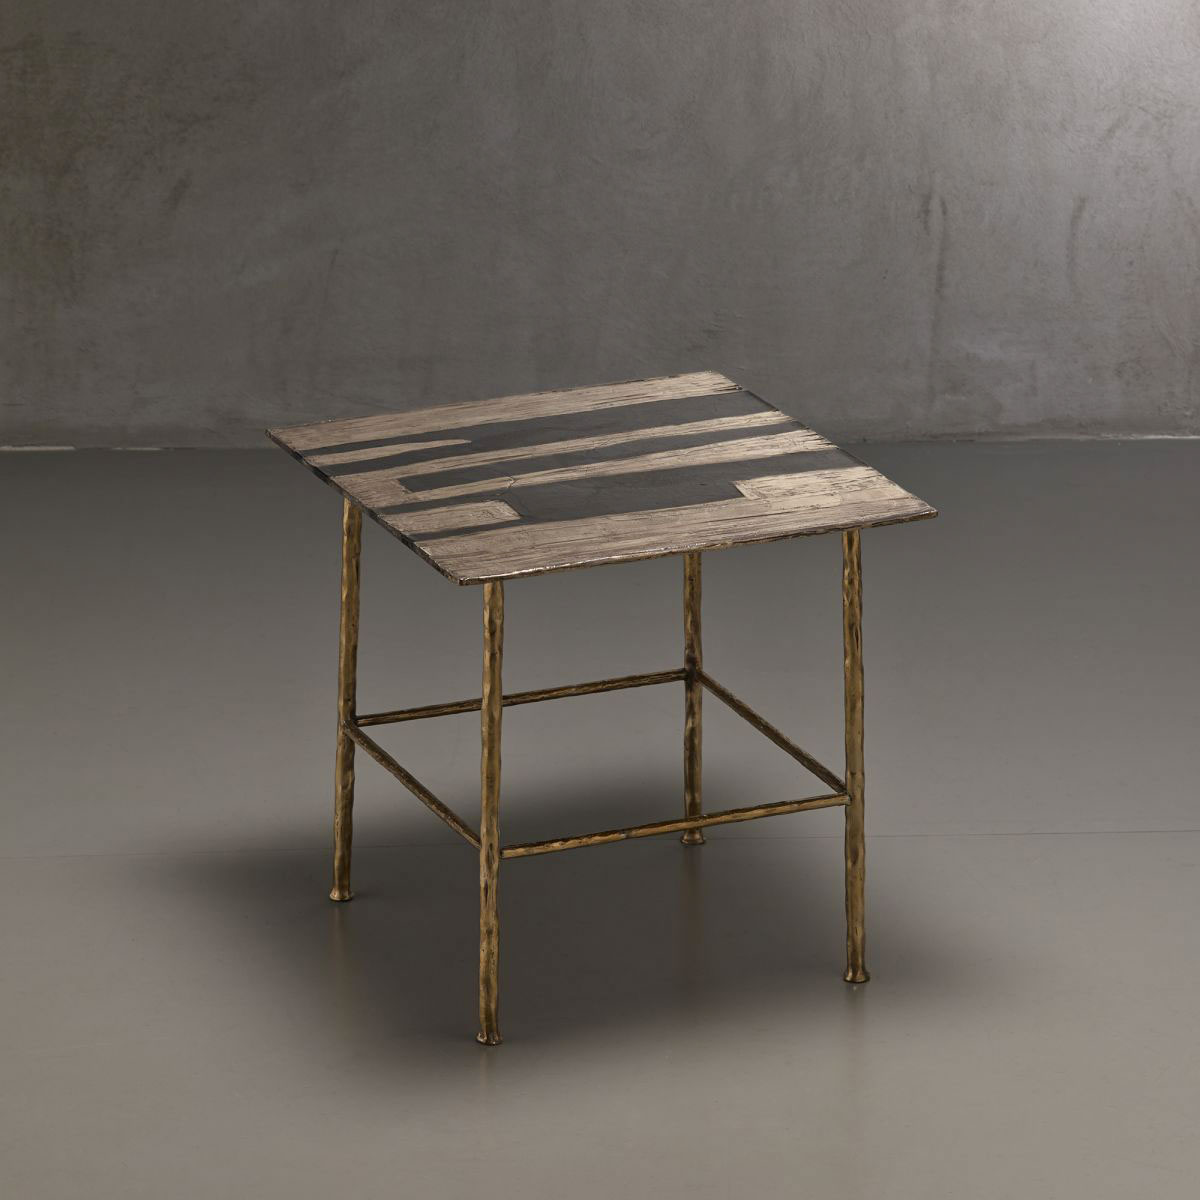 Low table 'Tracce' collection Osanna Visconti pic-1